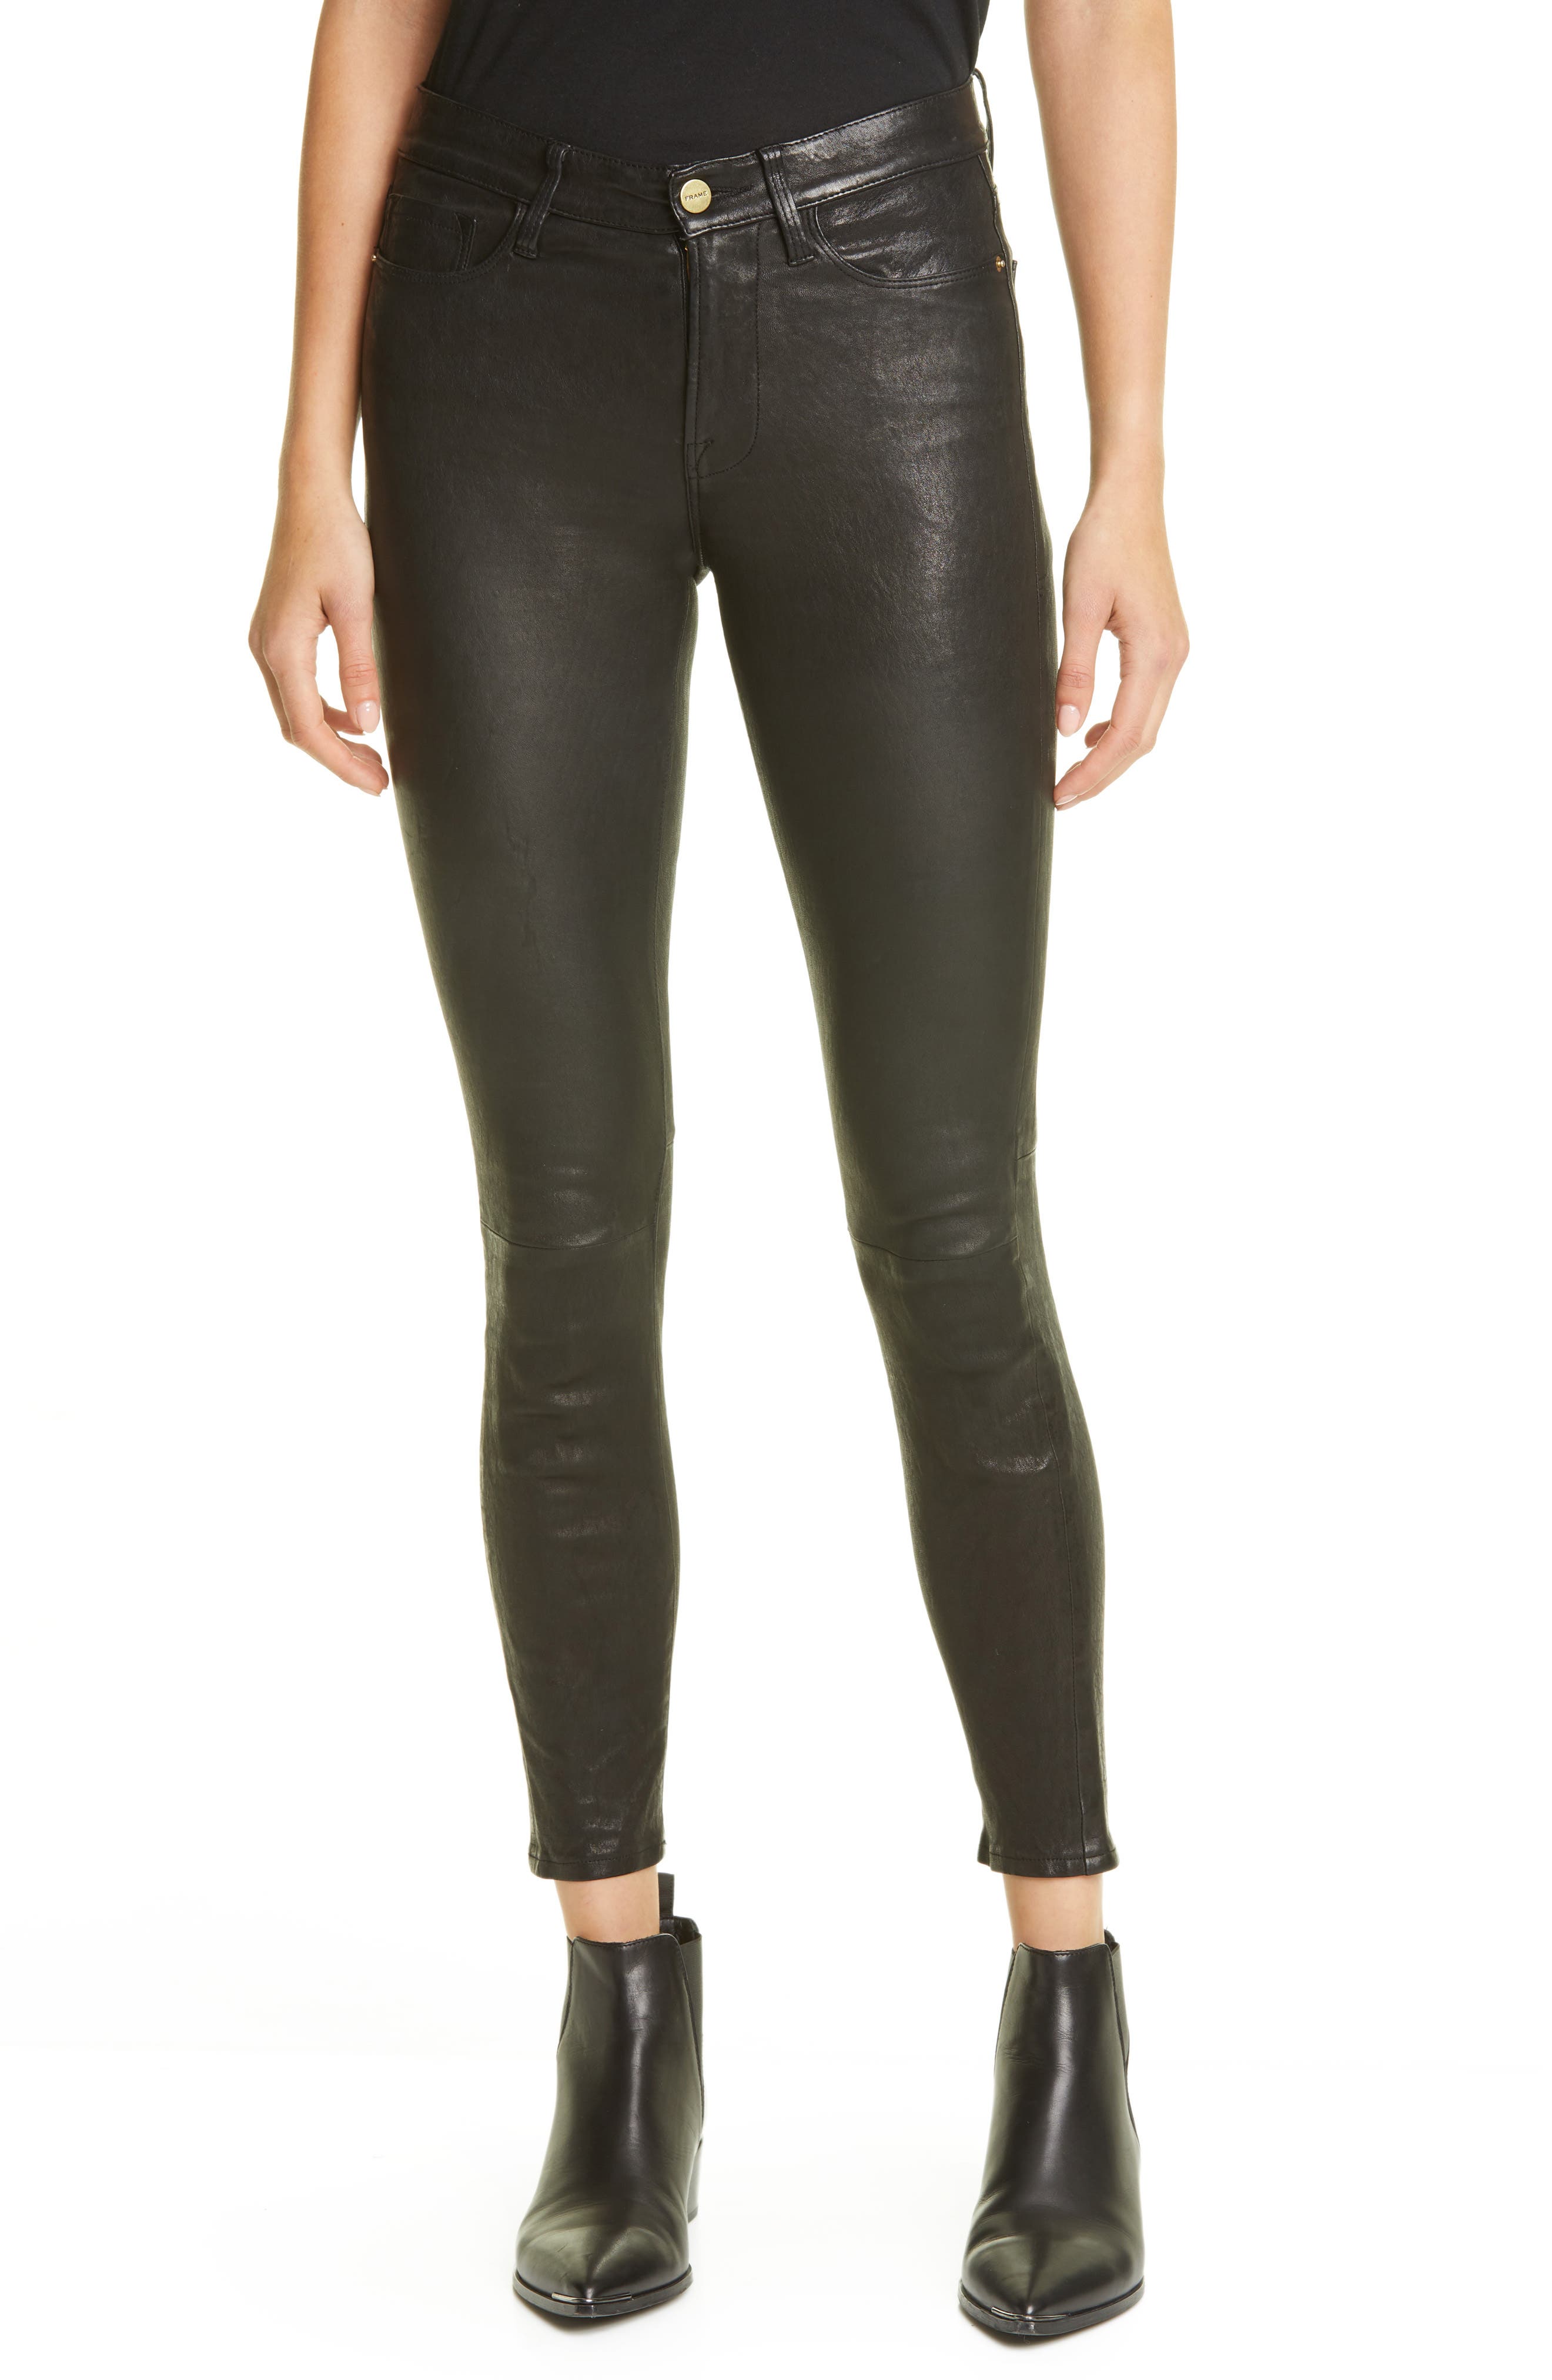 nordstrom leather pants